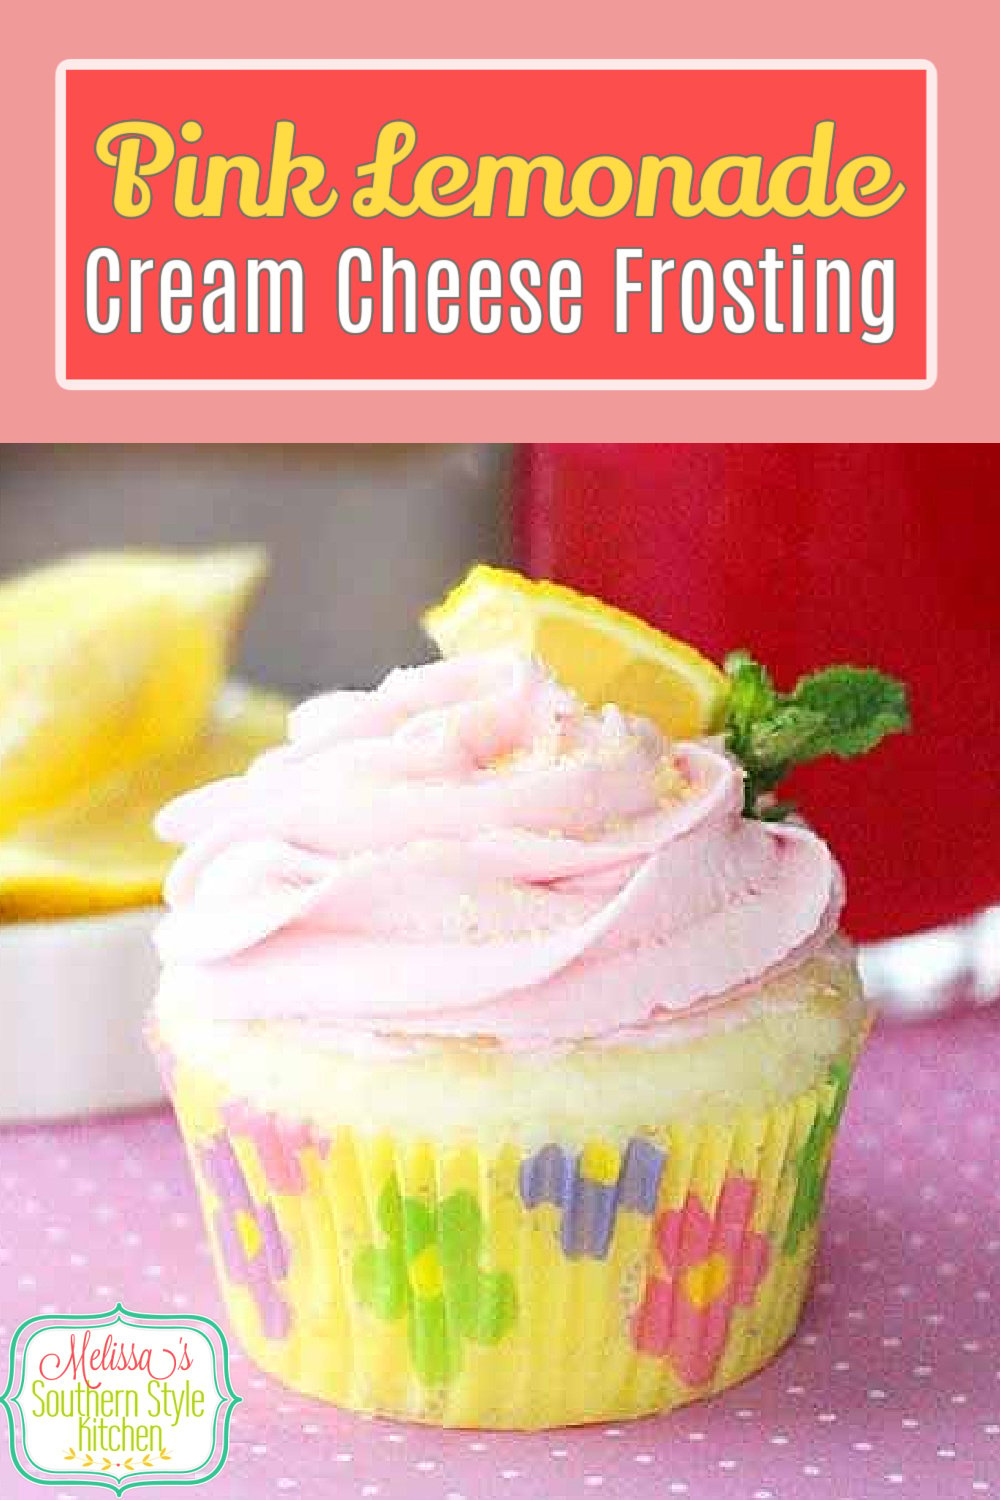 Pink Lemonade Cream Cheese Frosting for your next layer cake or batch of cupcakes #pinklemonade #pinklemonadefrosting #lemonade #creamcheeseicing #icingrecipes #lemonadefrosting #desserts #dessertfoodrecipes #southernrecipes #southernfood via @melissasssk